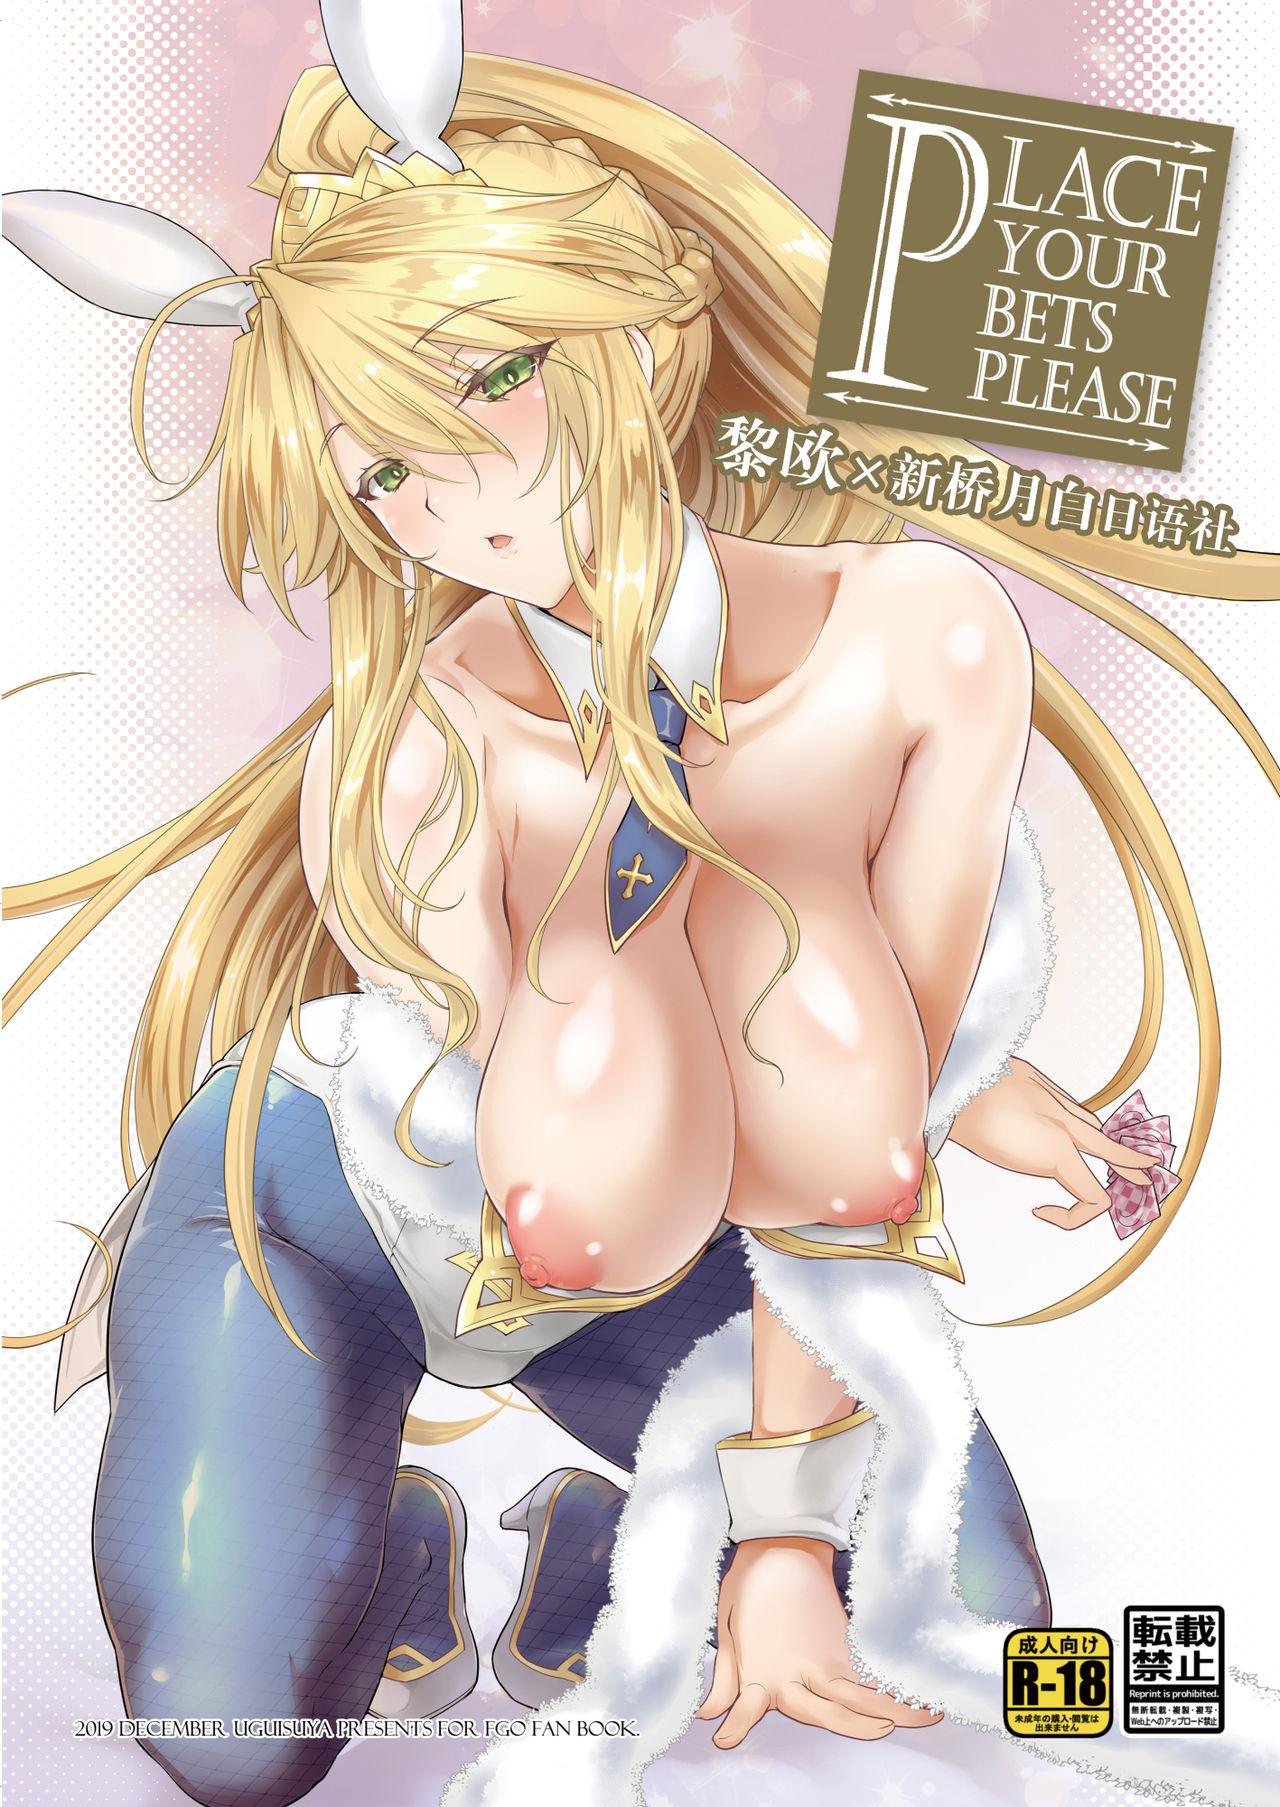 Smalltits Place your bets please - Fate grand order Gaycum - Picture 1